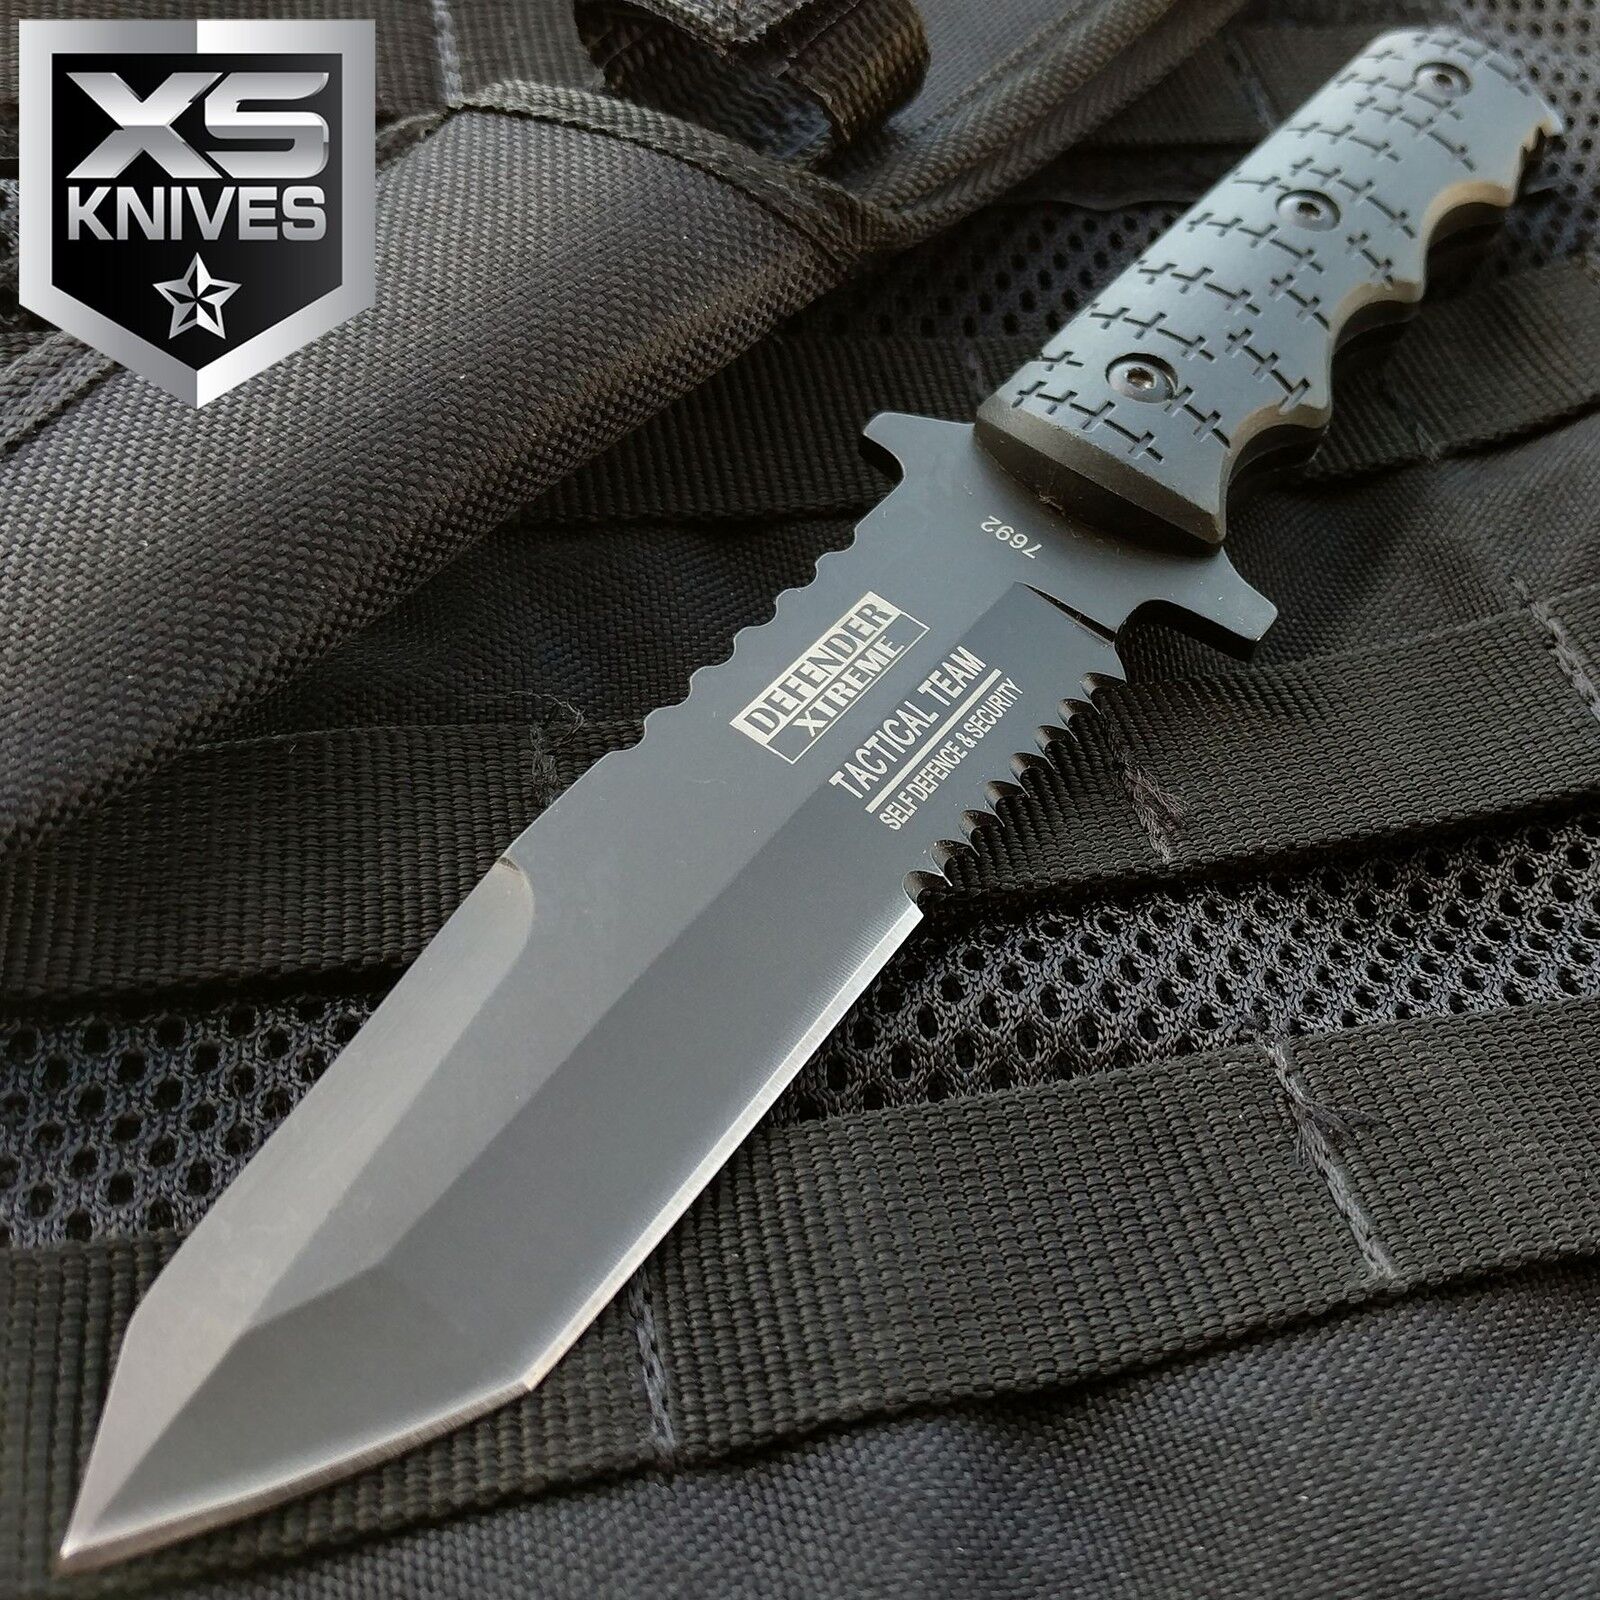 9" Combat Tactical Bowie Hunting Knife Military Fixed Blade Survival + Sheath